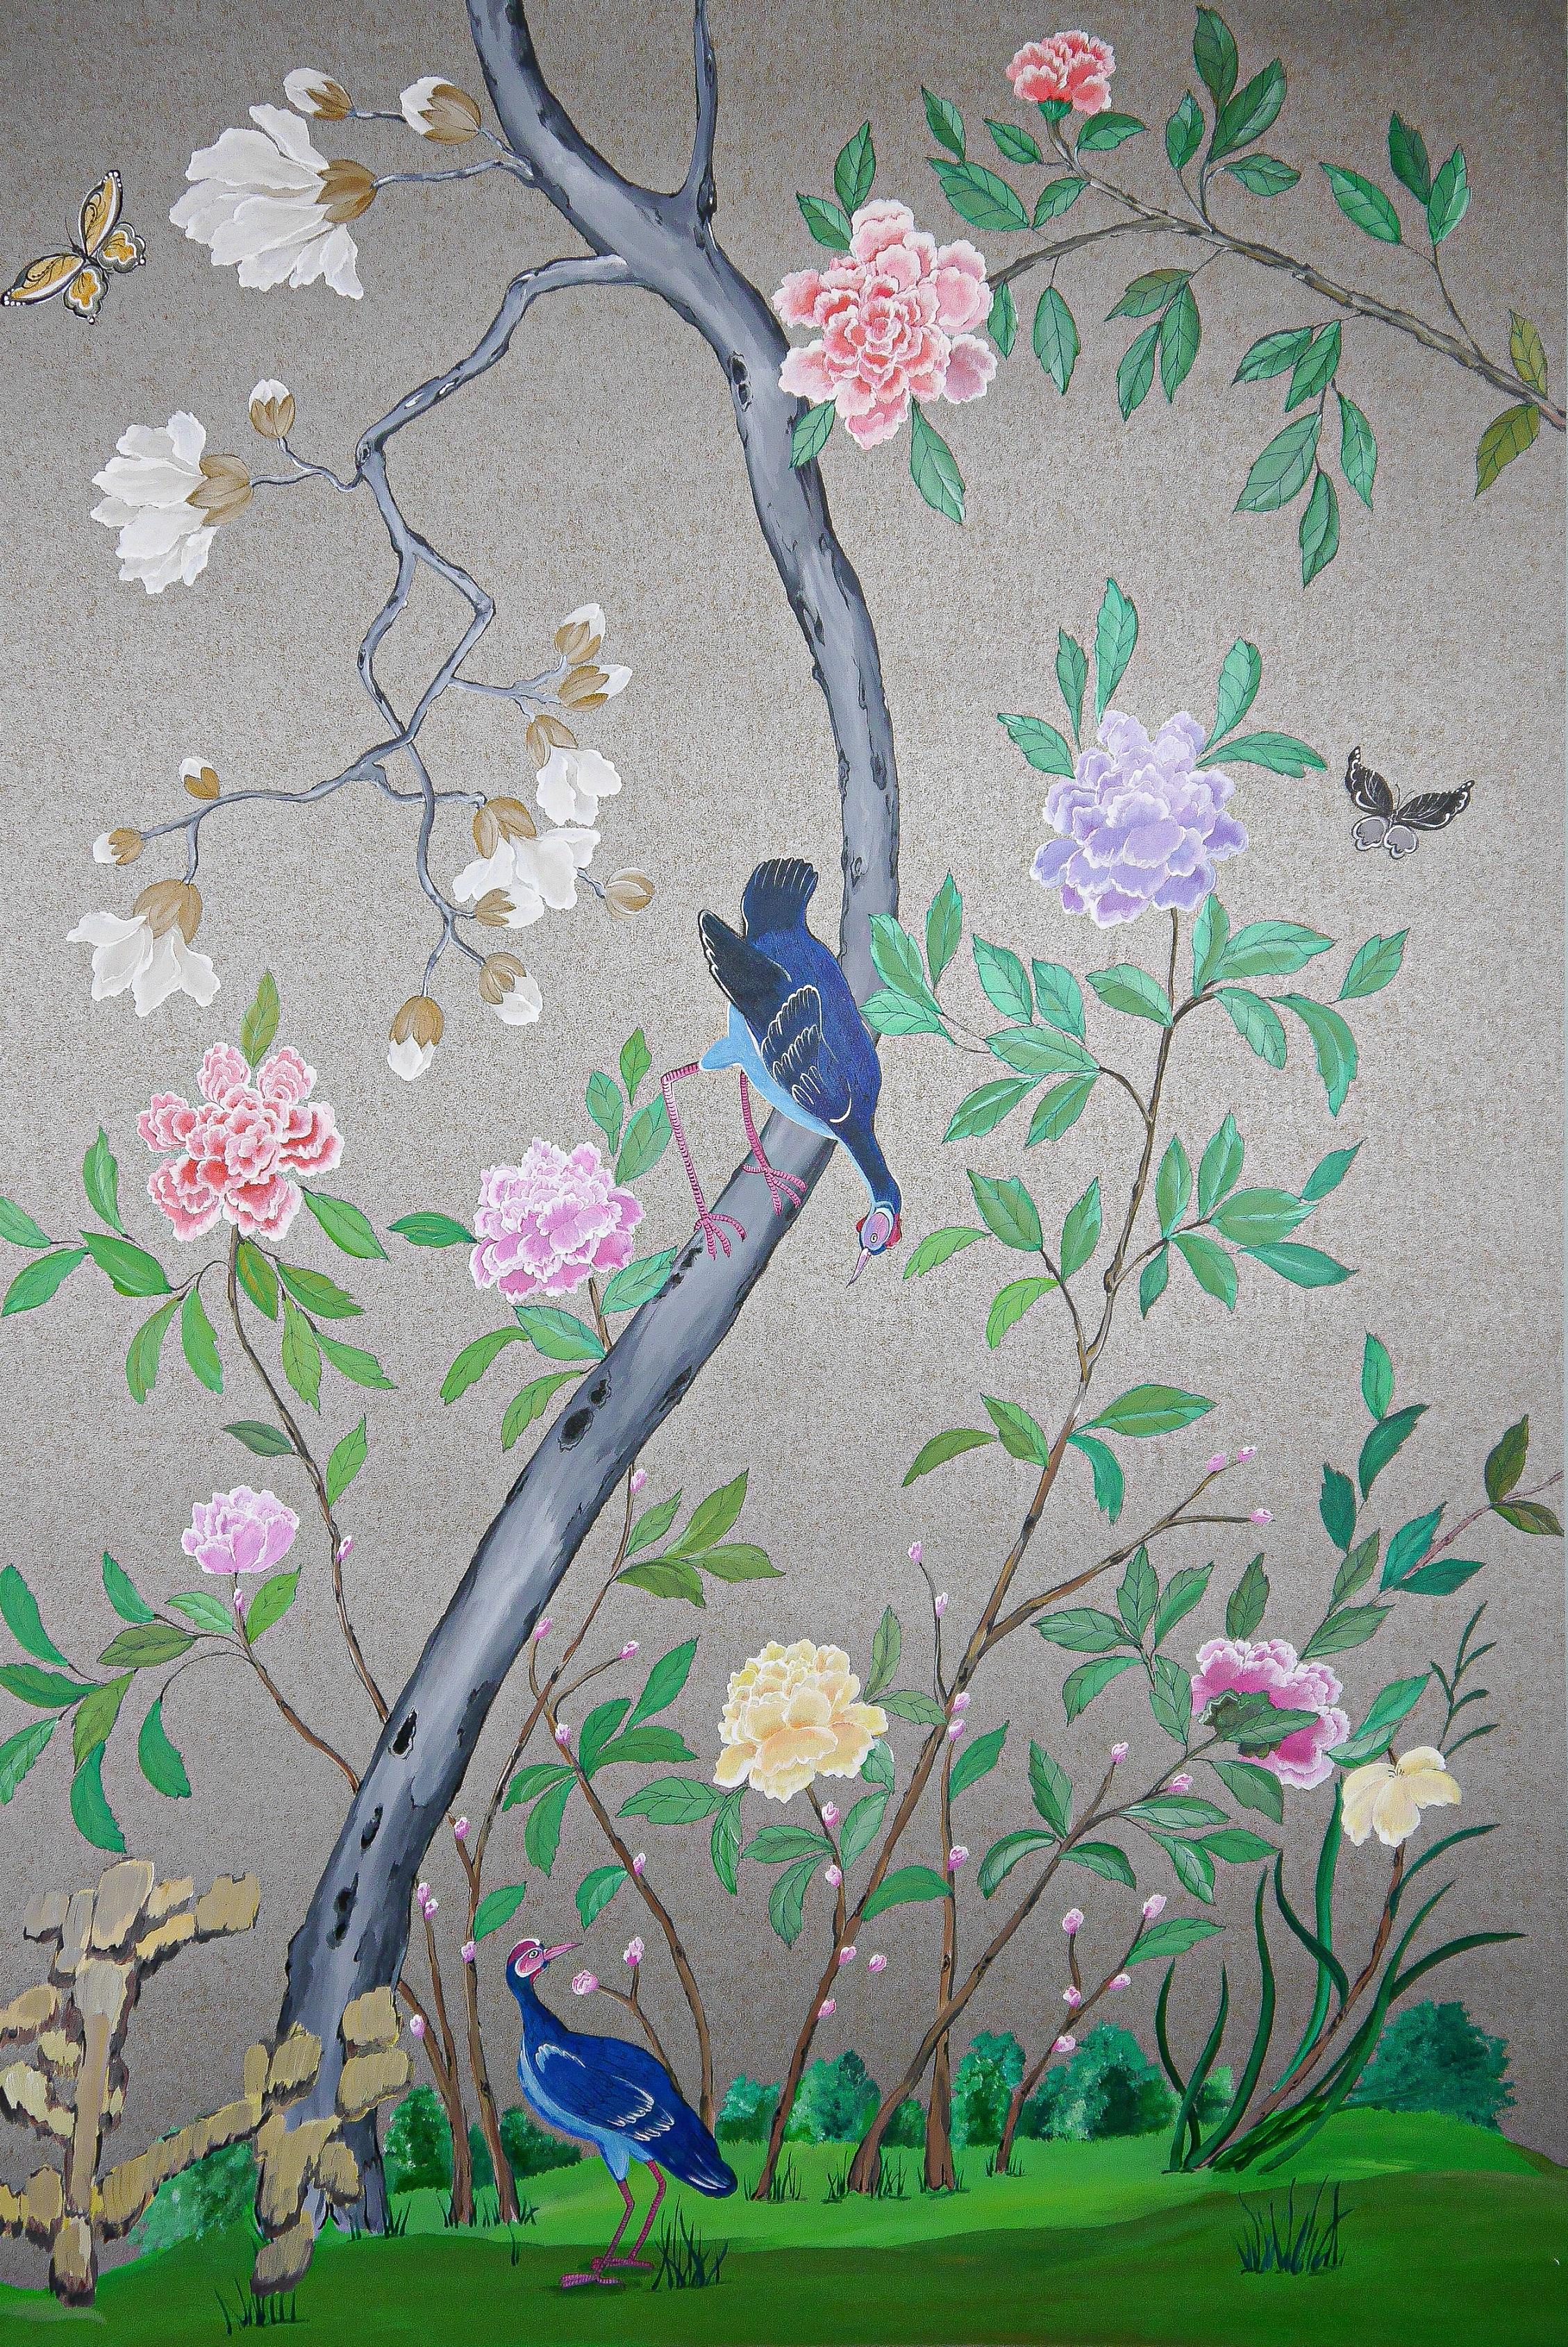 Berkeley: A reproduction of Chinese wallpaper panels, dated 1790-1810, in-stock. A suite of 24 Chinese export wallpaper panels was sold at Sotheby's for 137500 GBP.

This is a customized order for a set of 3 panels on dark silver metallic